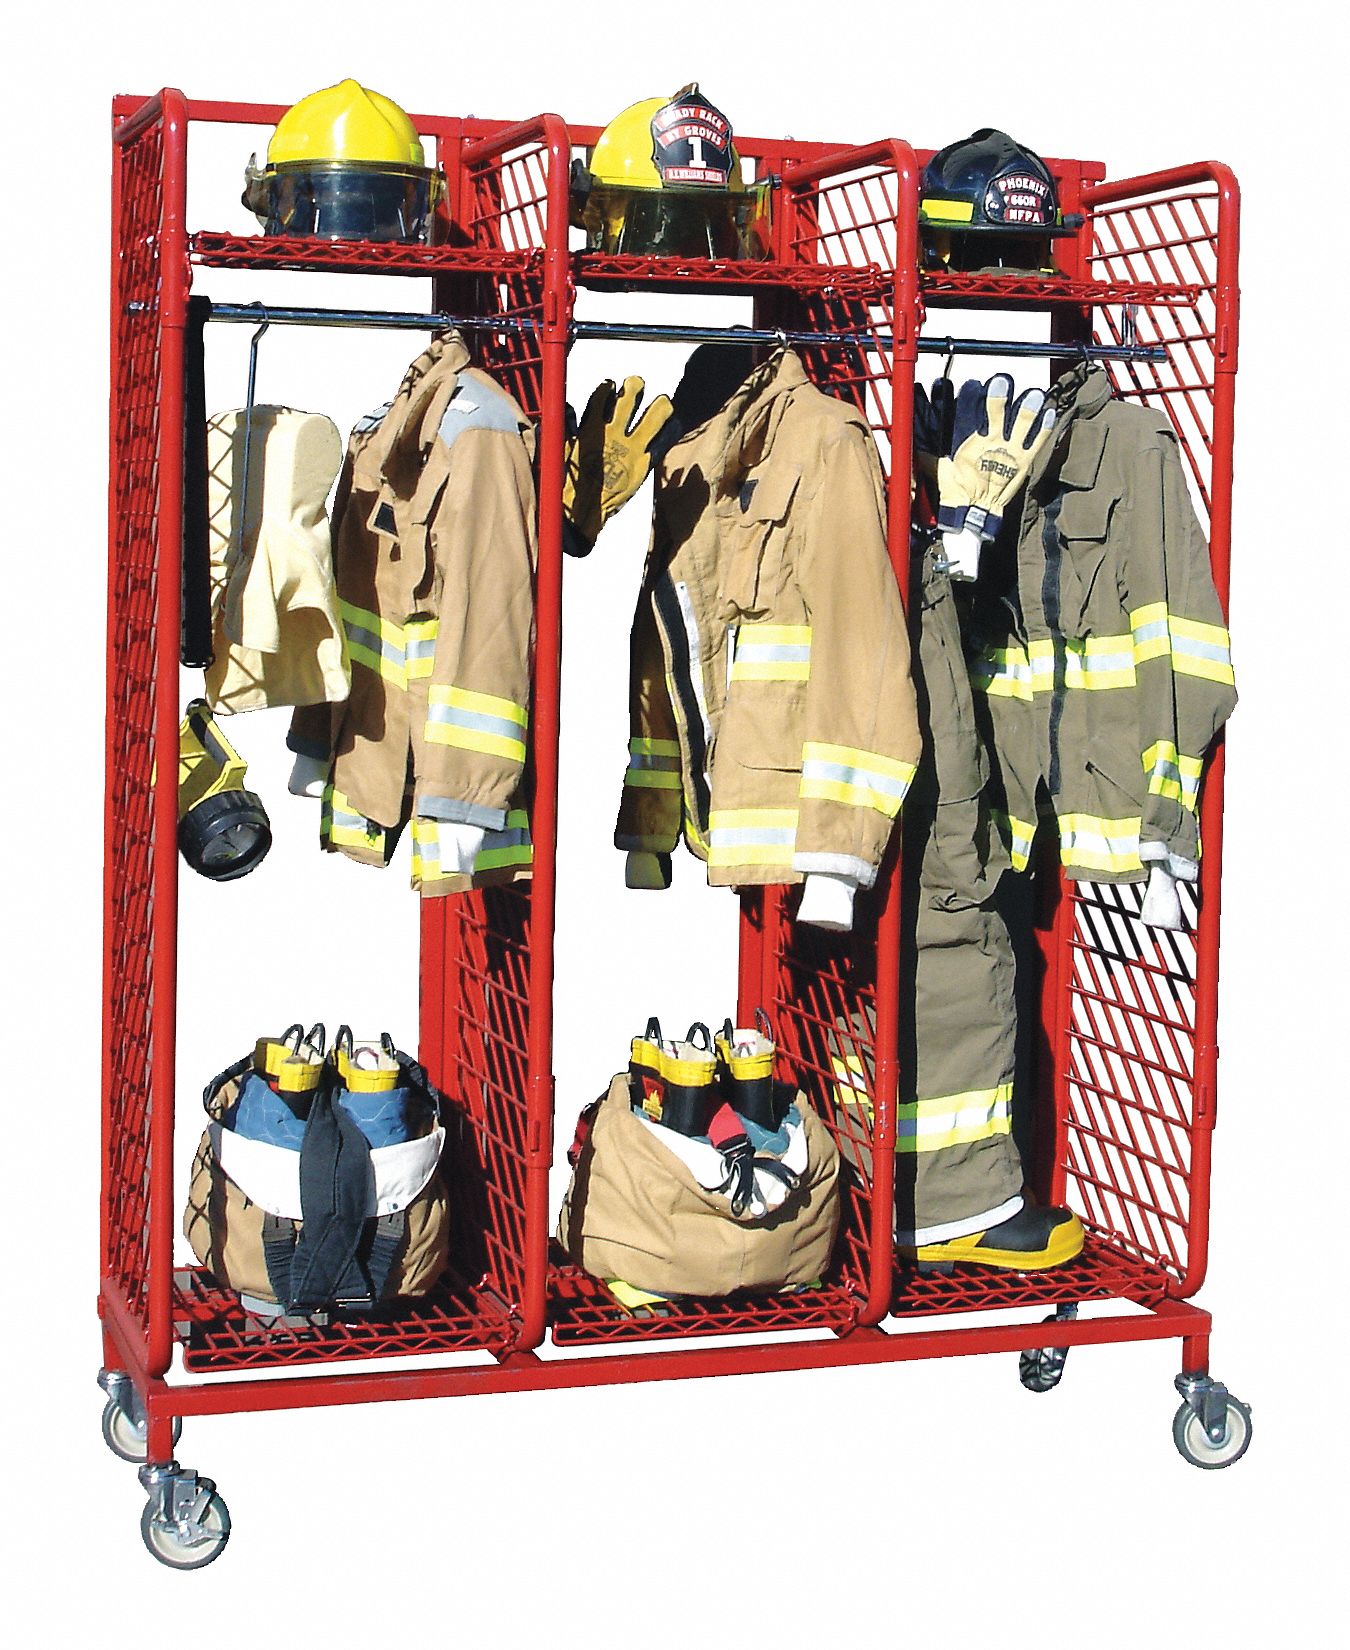 8EPX4 - Turnout Gear Rack 2 Side 6 Compartment